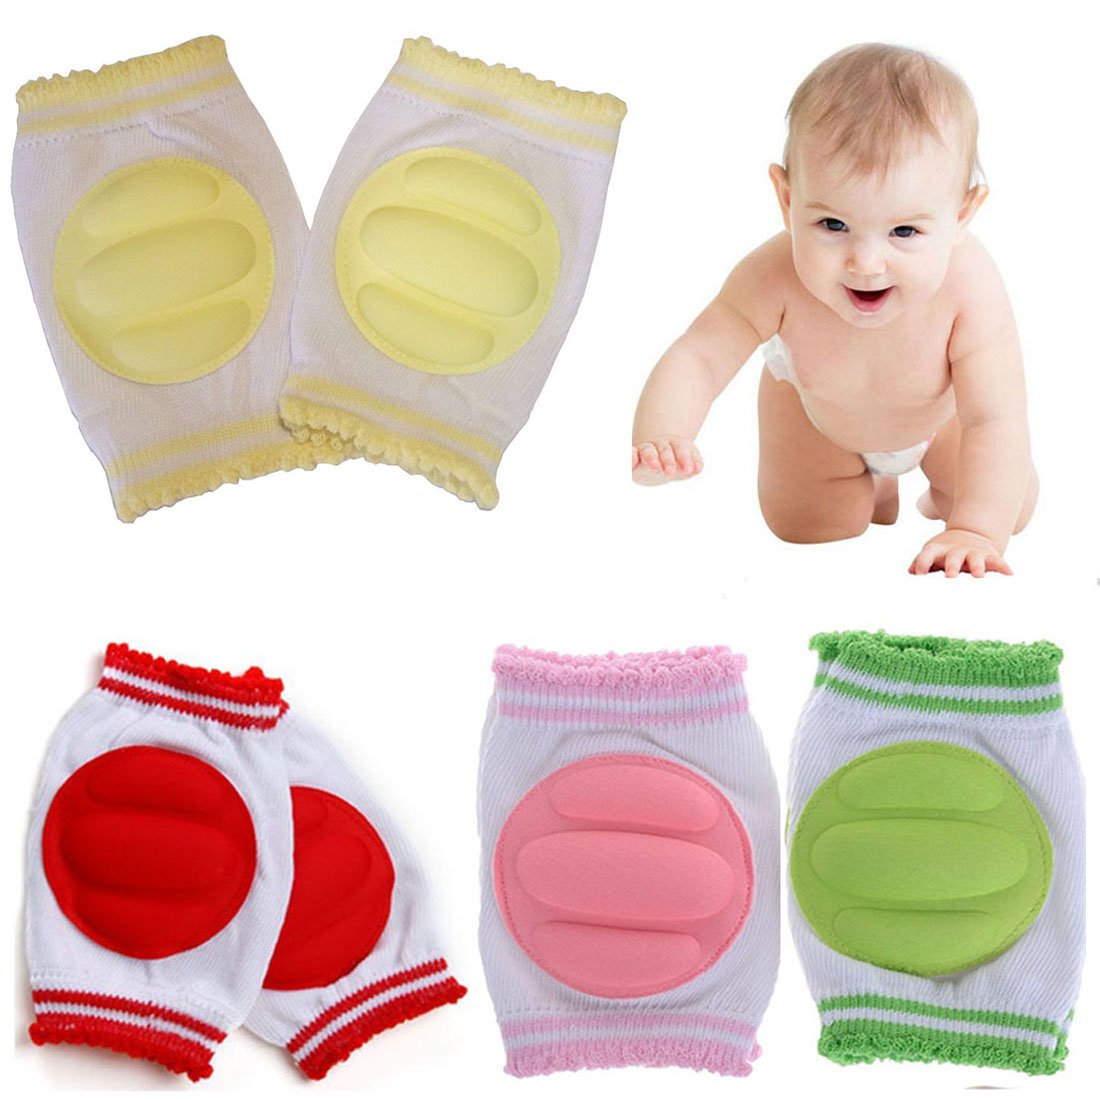 Top 9 Best Baby Knee Pads for Crawling Reviews in 2022 1